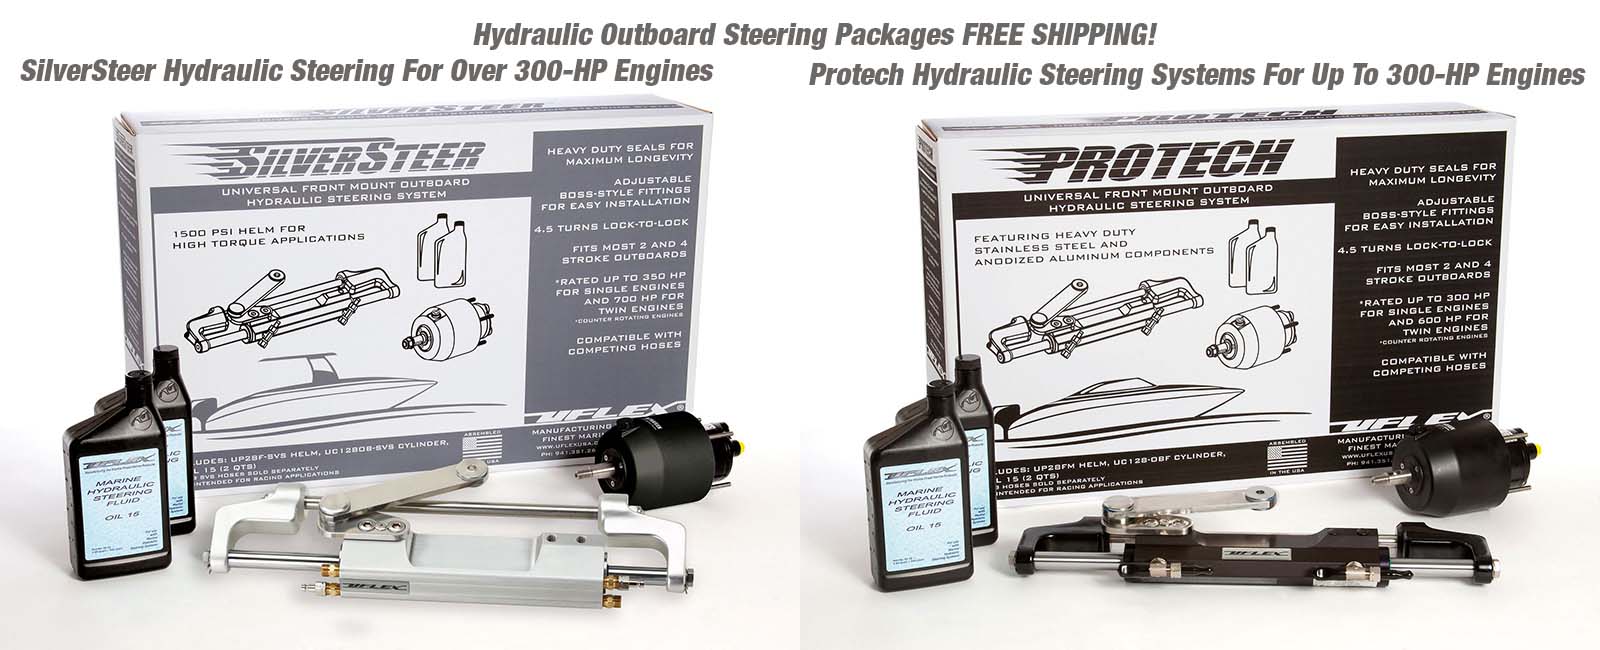 SilverSteer And Protech-1 Hydraulic Steering Systems